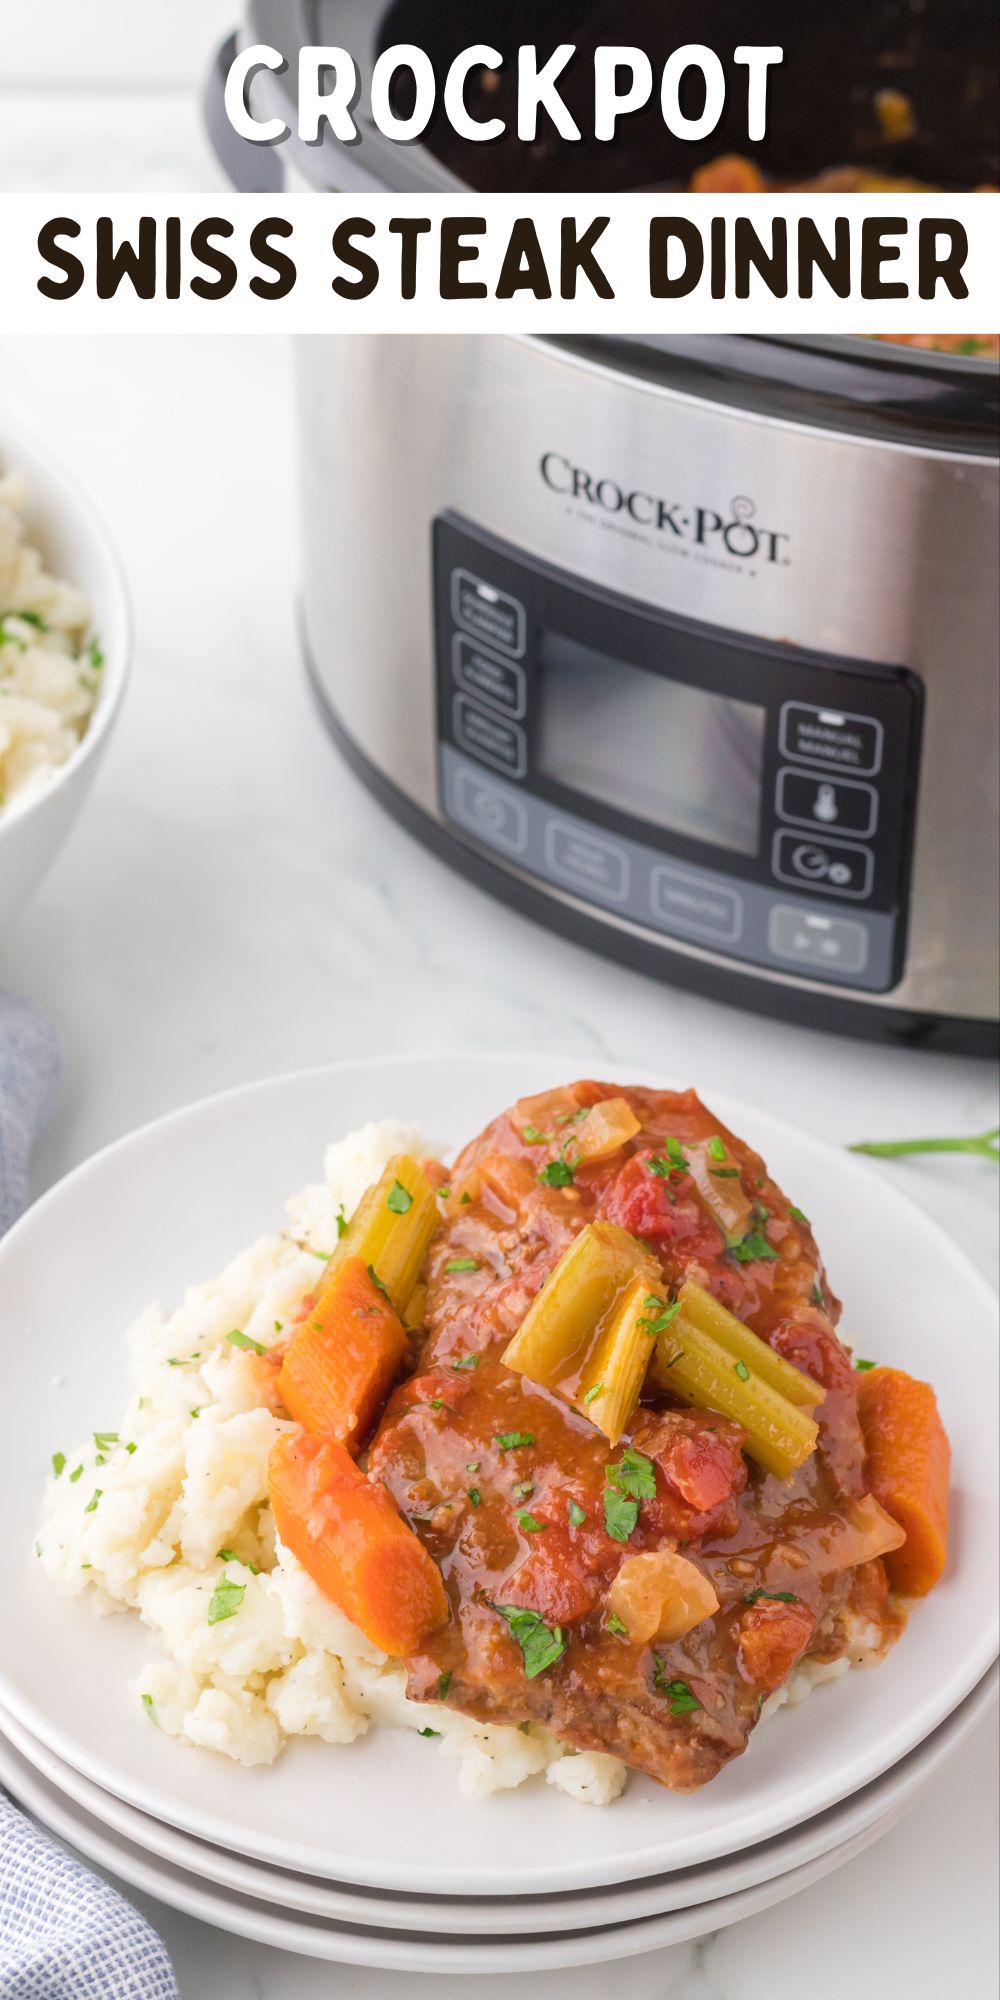 Do you love hearty, comfort food recipes? If so, you're going to love this Crockpot Swiss Steak Dinner recipe. via @familyfresh